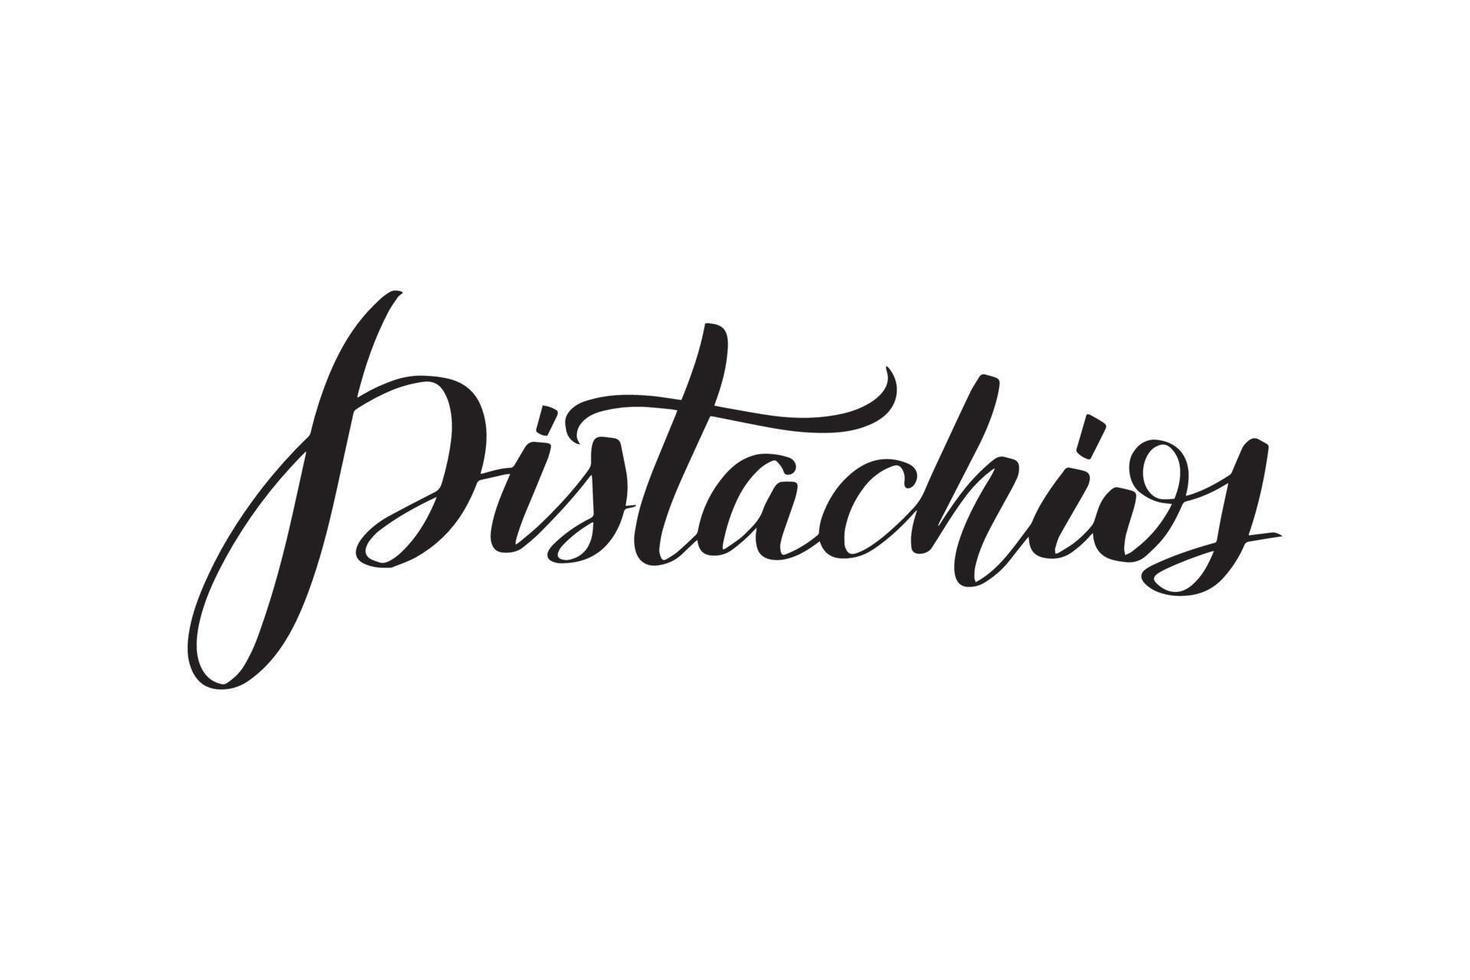 Inspirational handwritten brush lettering Pistachios. Vector calligraphy illustration isolated on white background. Typography for banners, badges, postcard, tshirt, prints, posters.